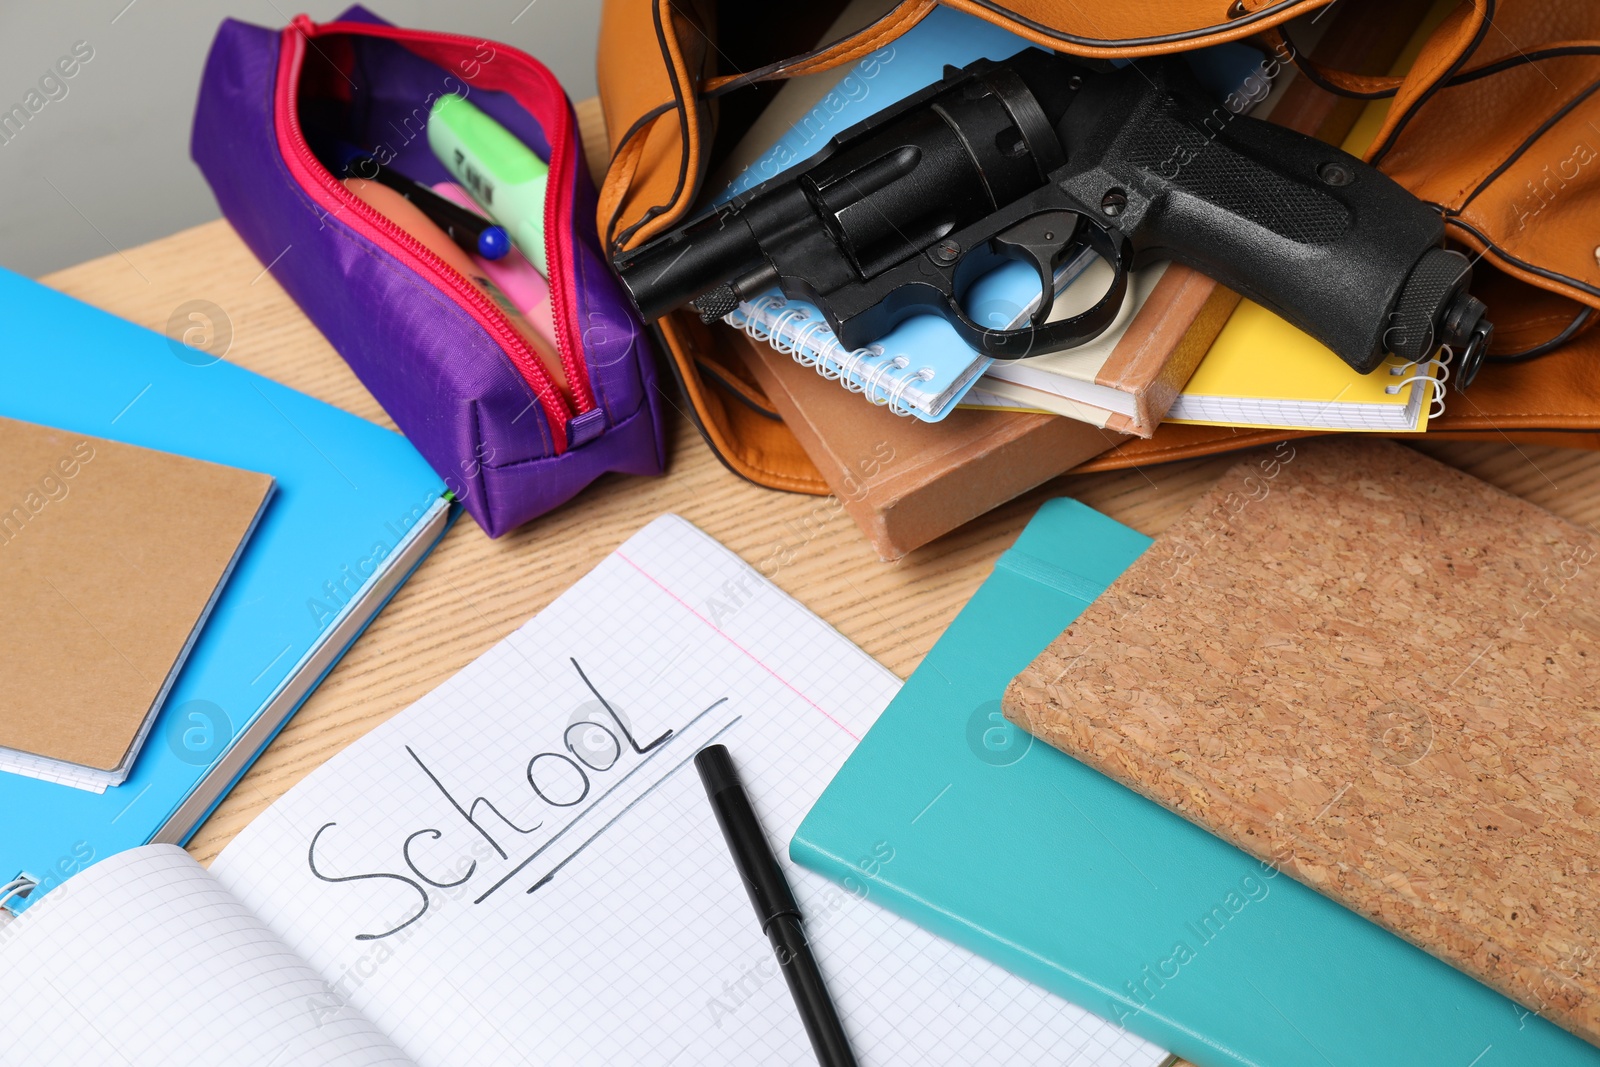 Photo of Gun and school stationery on wooden table, above view